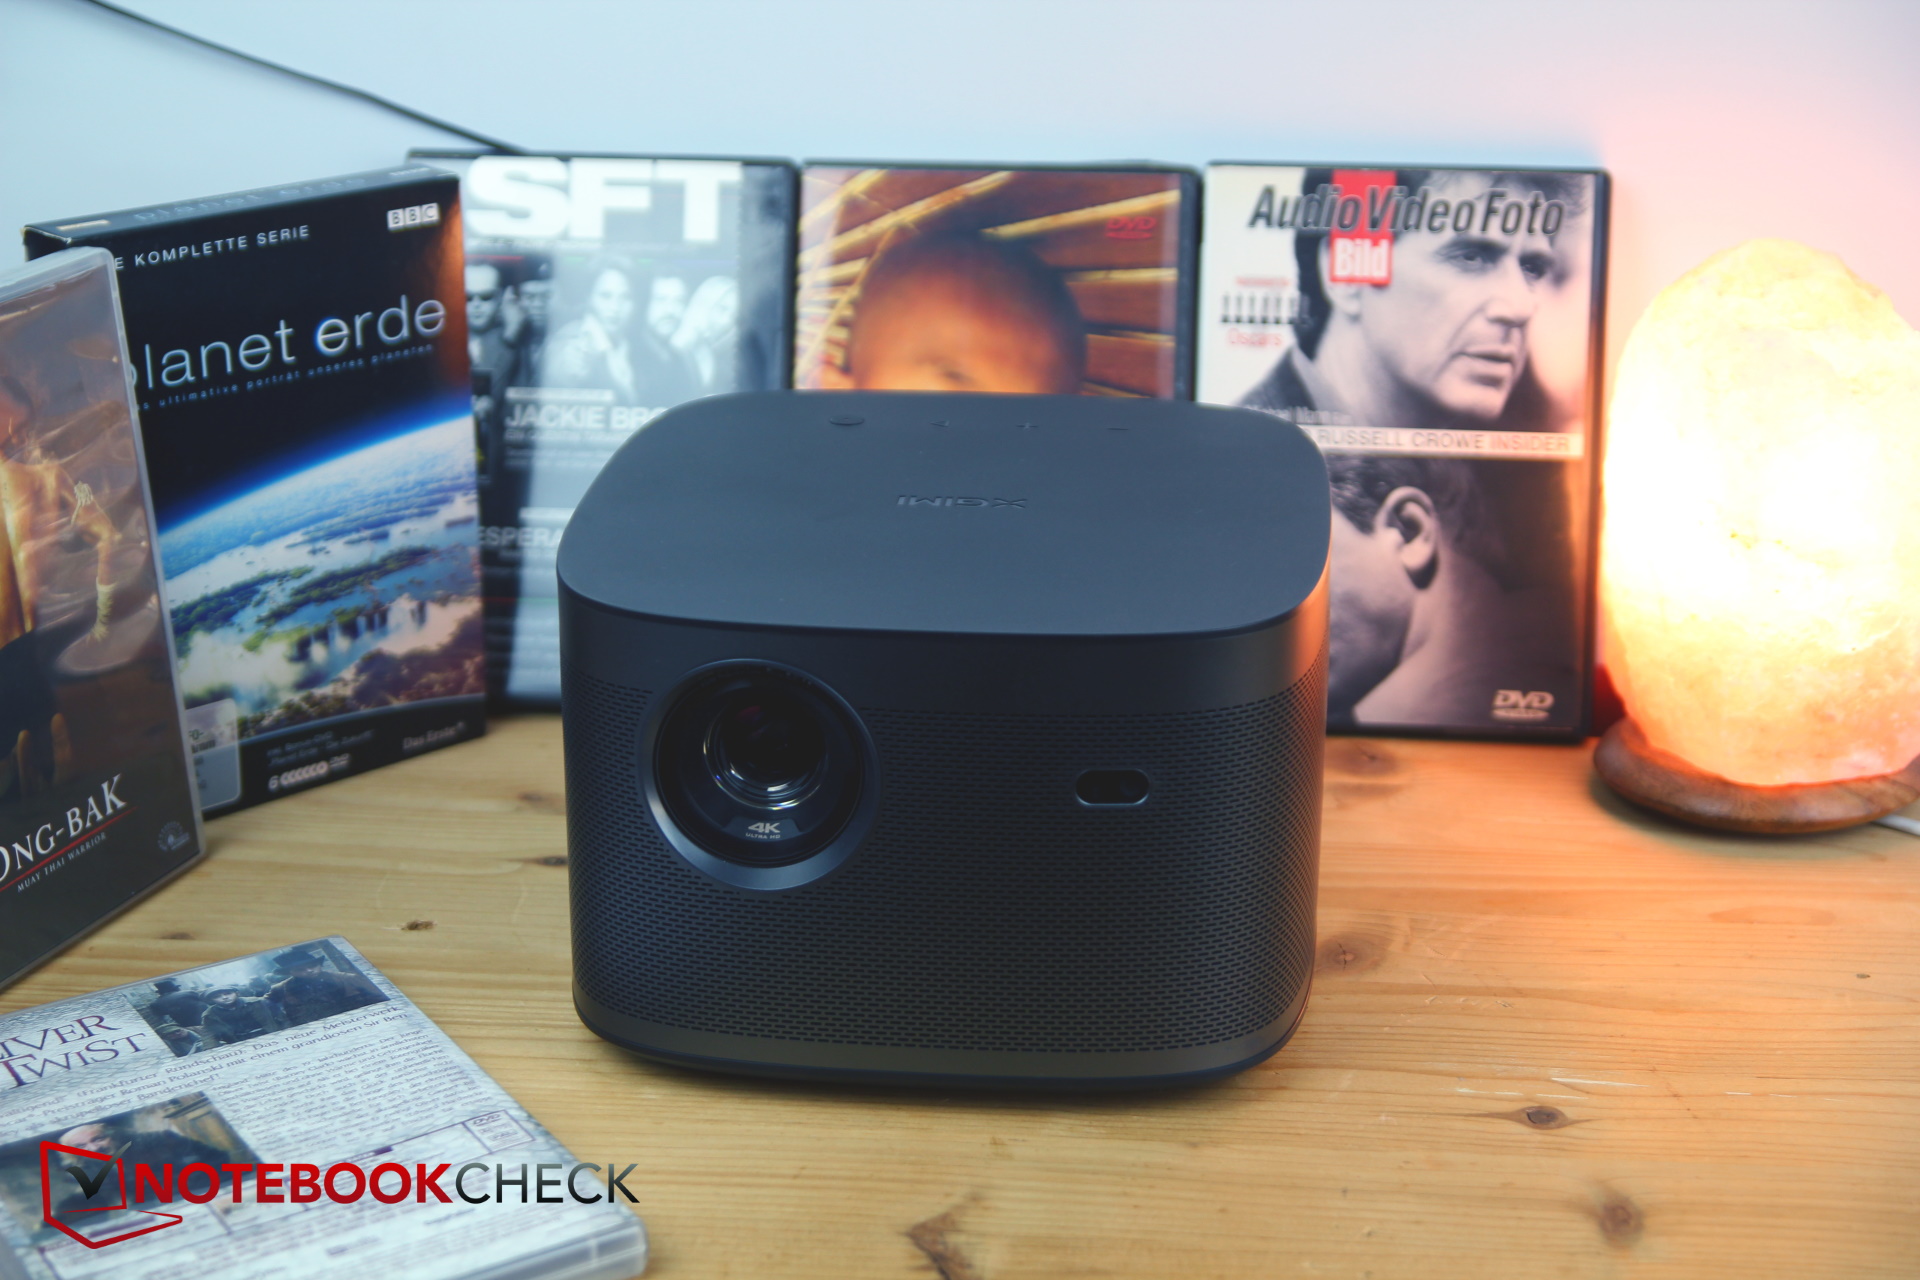 XGIMI Horizon Pro 4K Projector Review